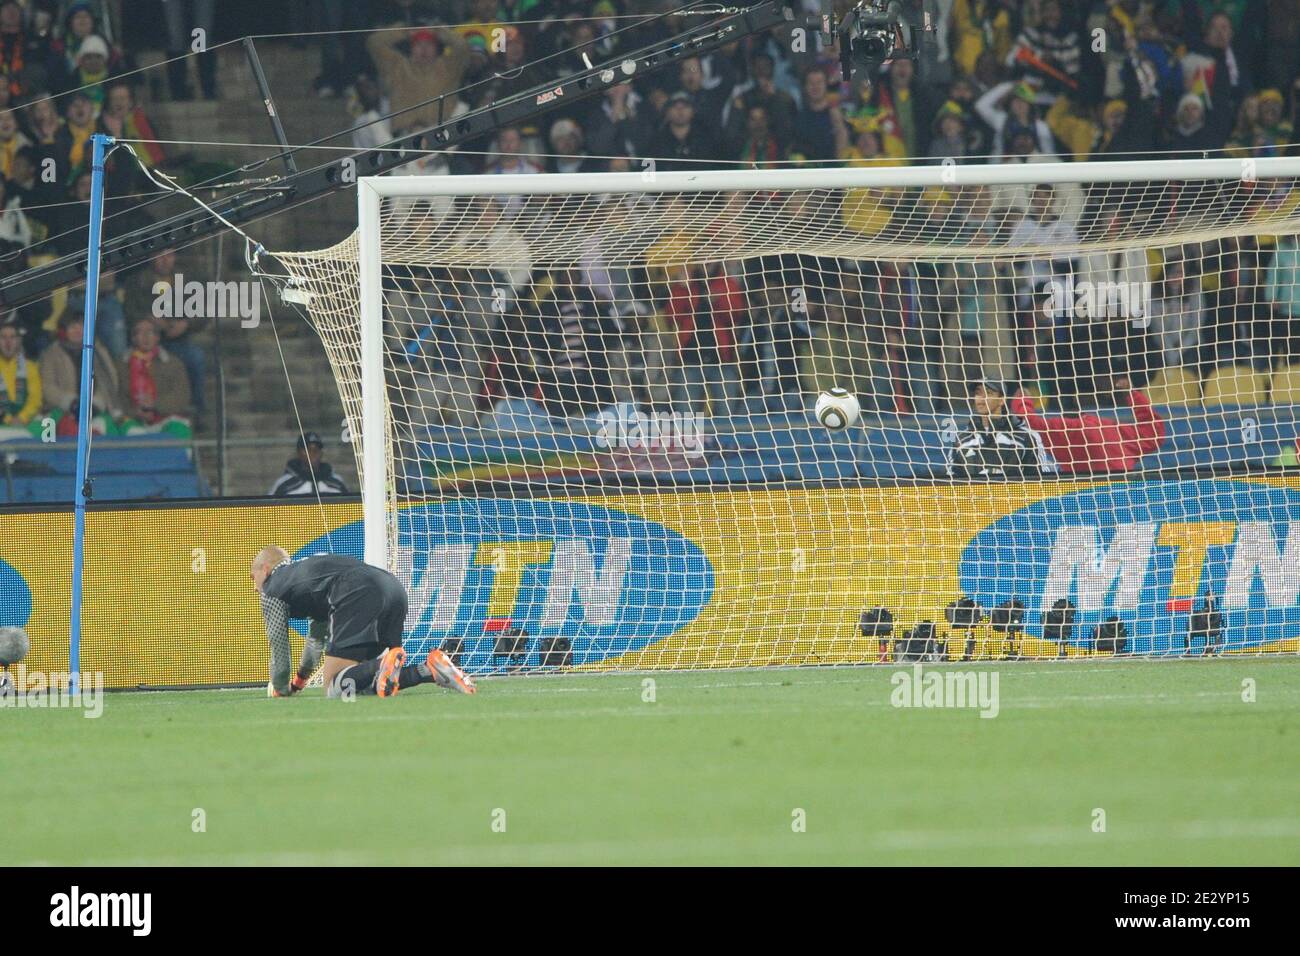 Ghana's Kevin Prince Boateng scoring the 1-0 goal during the 2010 FIFA World Cup South Africa 1/8 of final Soccer match, Ghana vs USA at Royal Bafokeng football stadium in Rustenburg, South Africa on June 26, 2010. Ghana won 2-1. Photo by Henri Szwarc/ABACAPRESS.COM Stock Photo